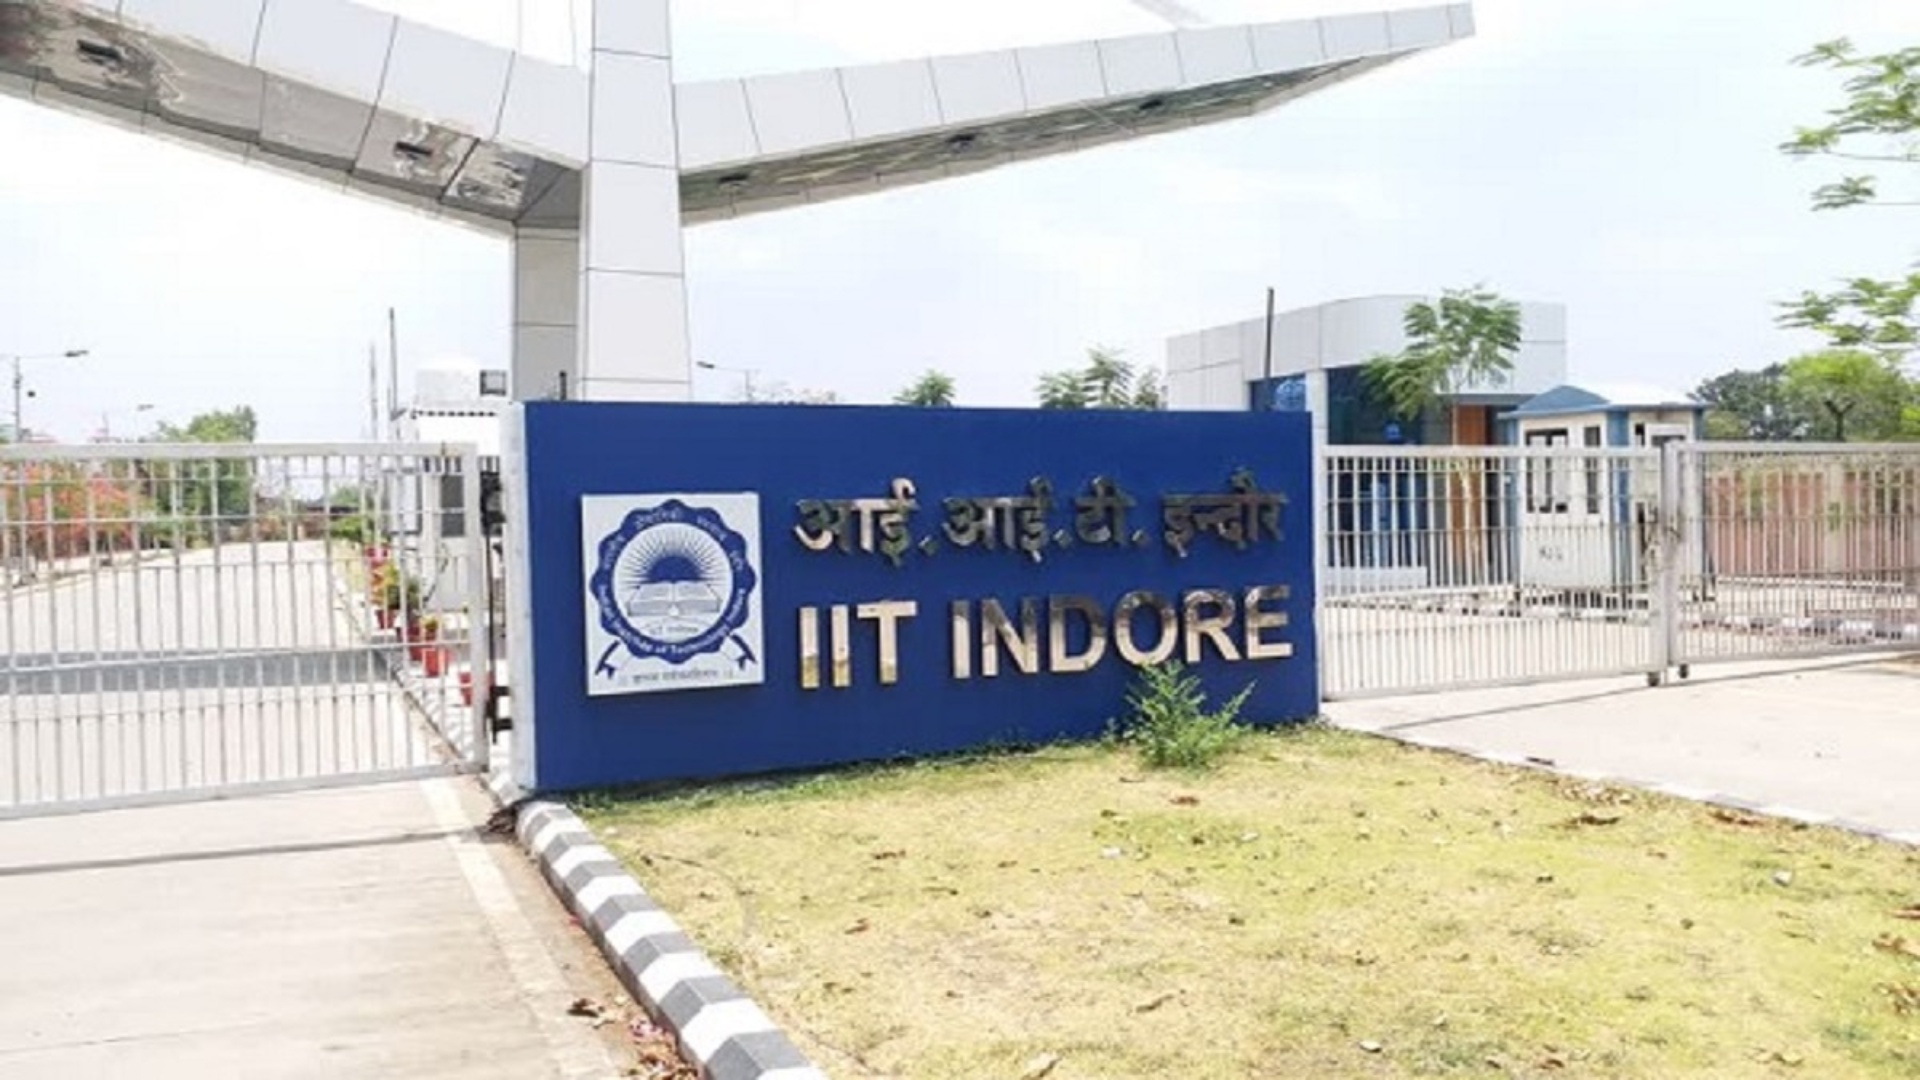 Madhya Pradesh Police Search School On IIT Indore Campus After Bomb Threat